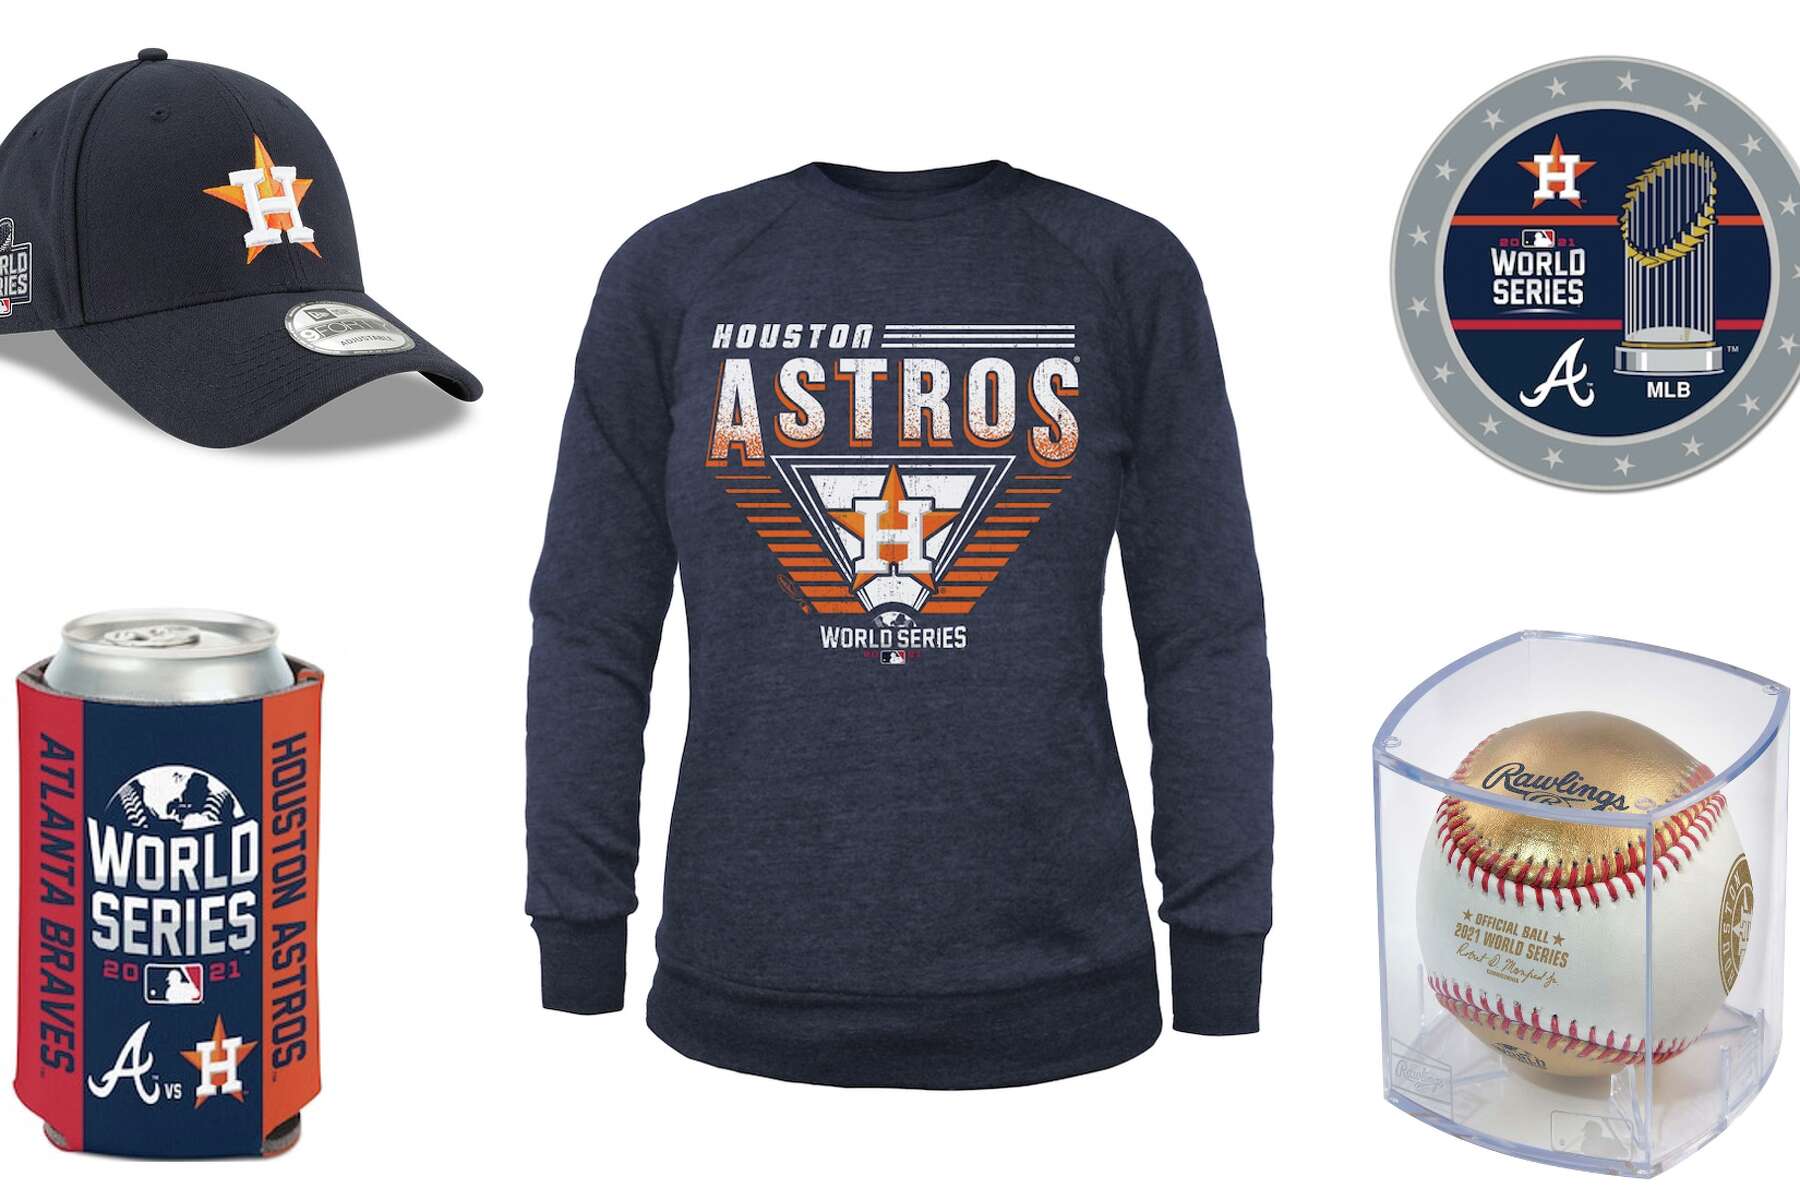 WORLD SERIES MERCH: Here's what stores in Houston are now open to